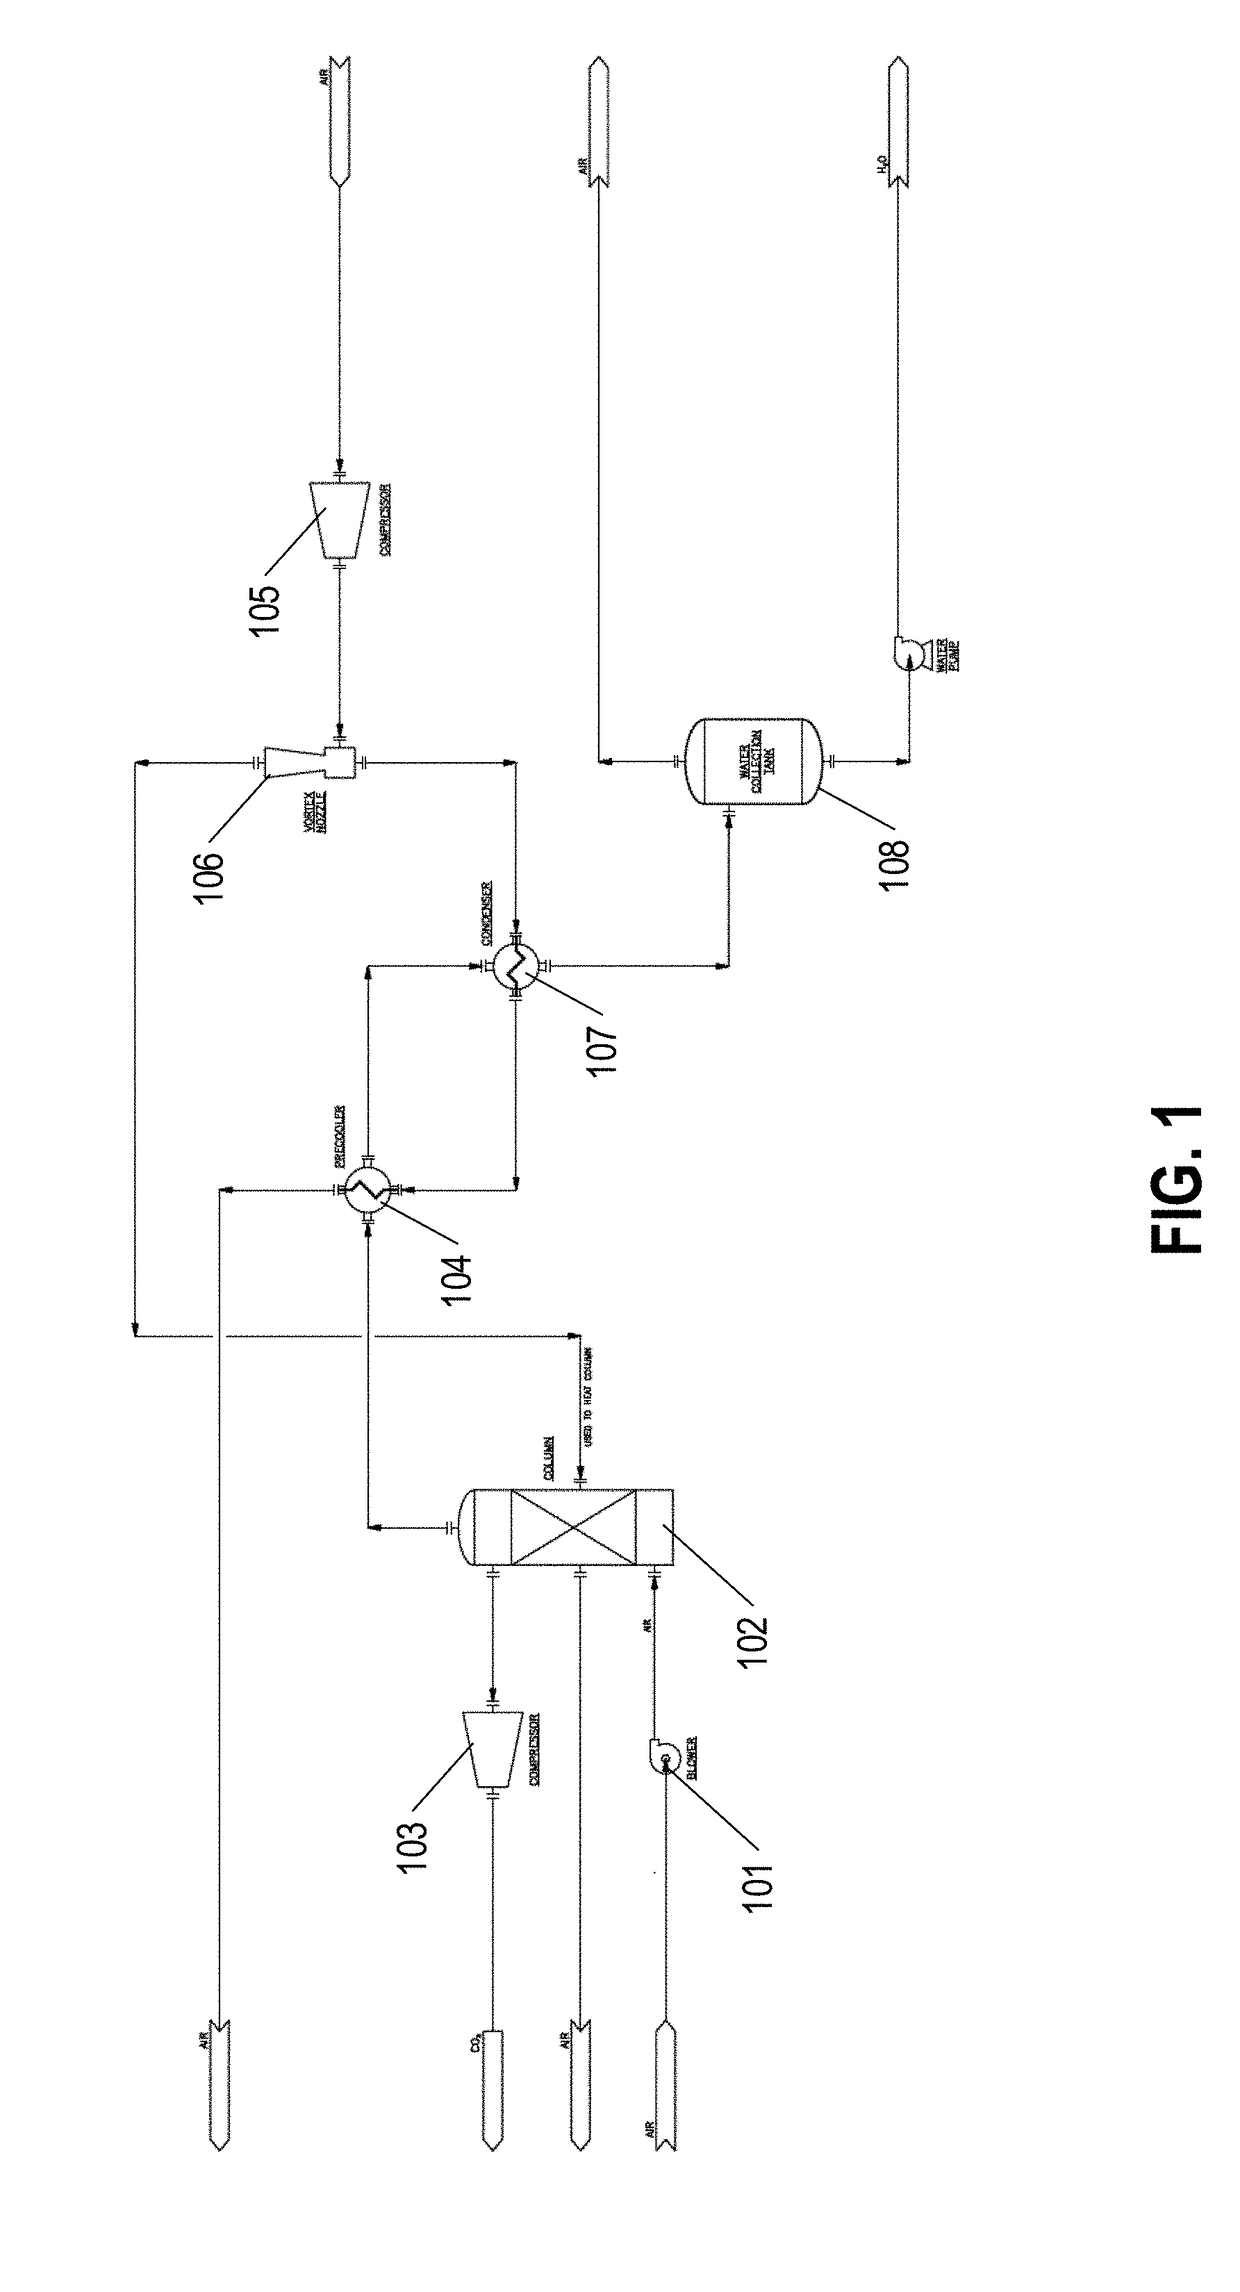 Atmospheric water generation systems and methods